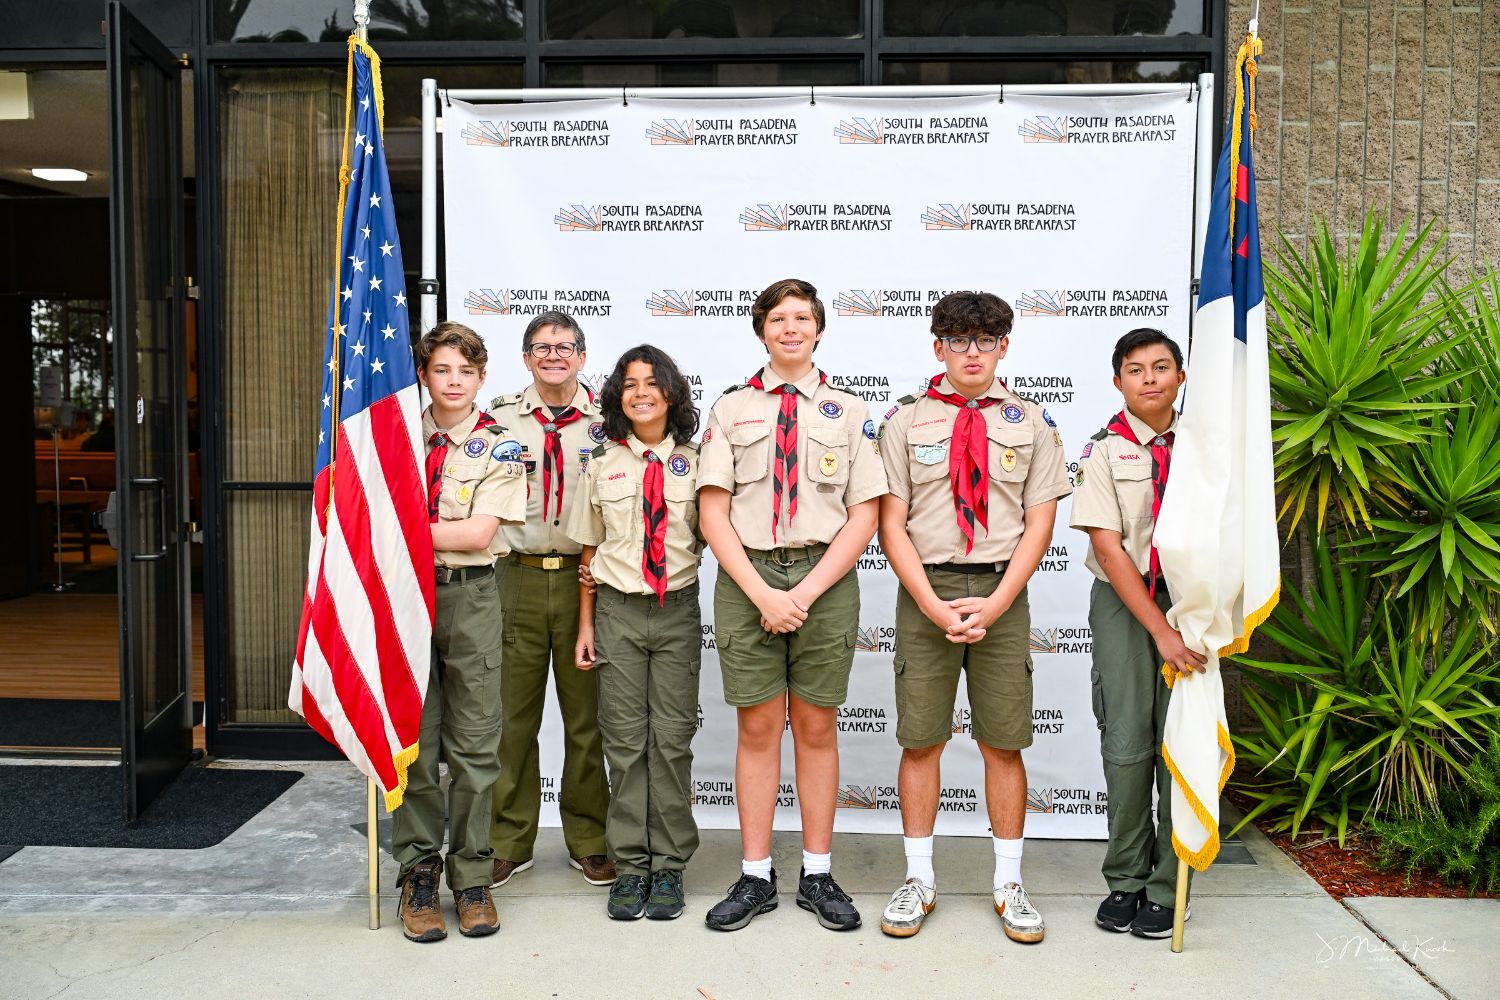 PHOTO: J. Mike Kwok | The South Pasadenan | Boy Scout Troop 333 at the Prayer Breakfast to perform the Color Guard Ceremony.